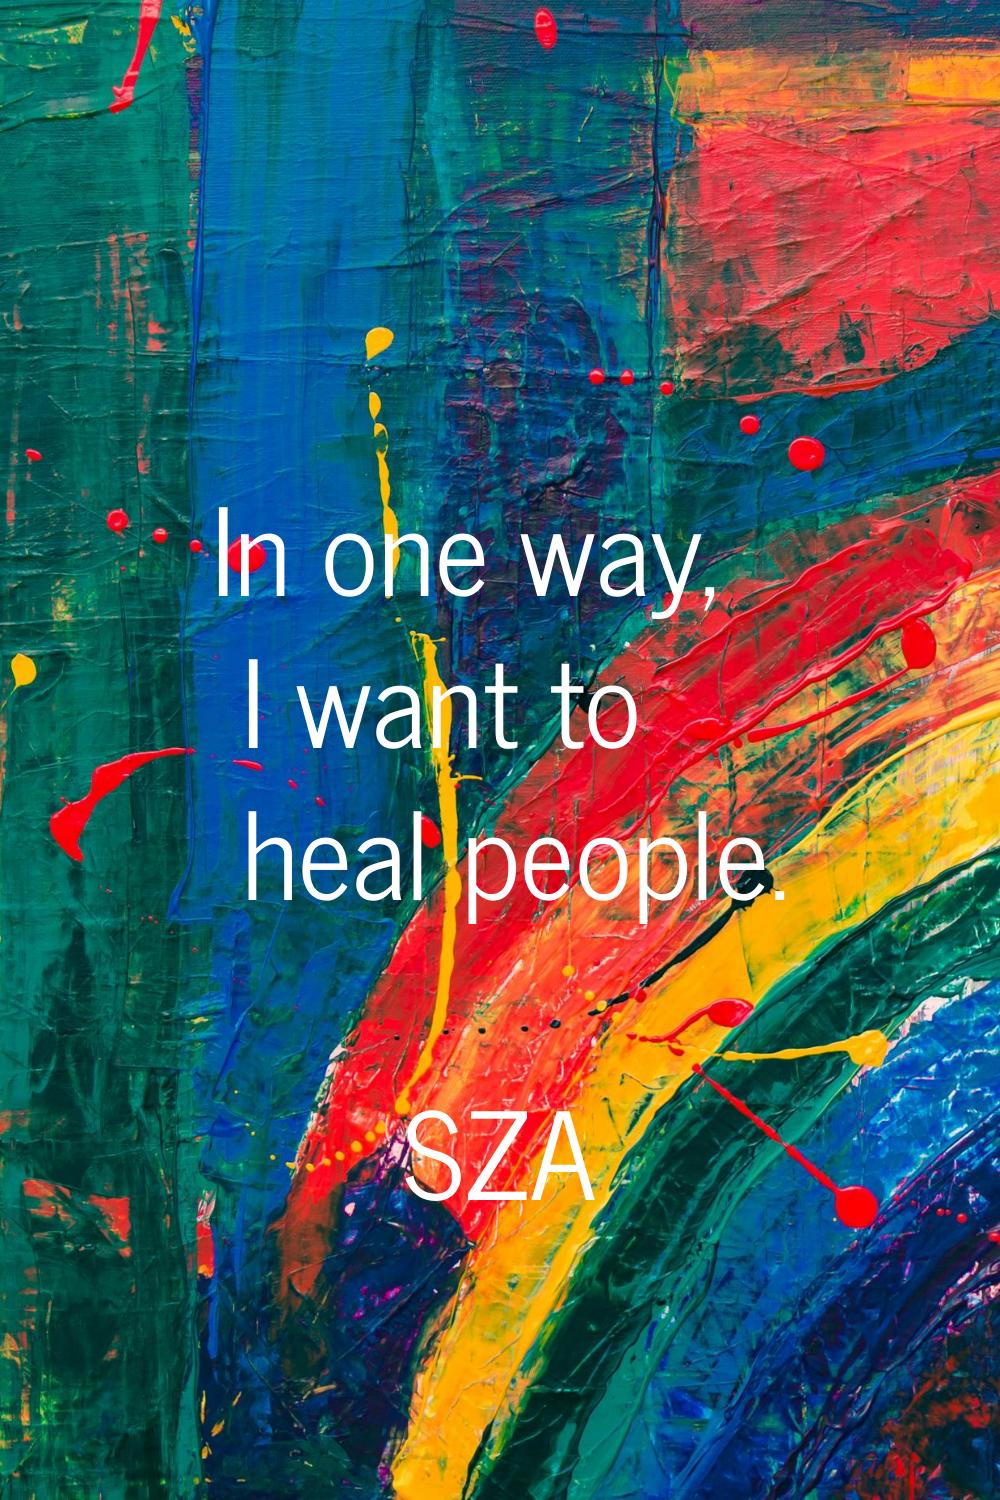 In one way, I want to heal people.